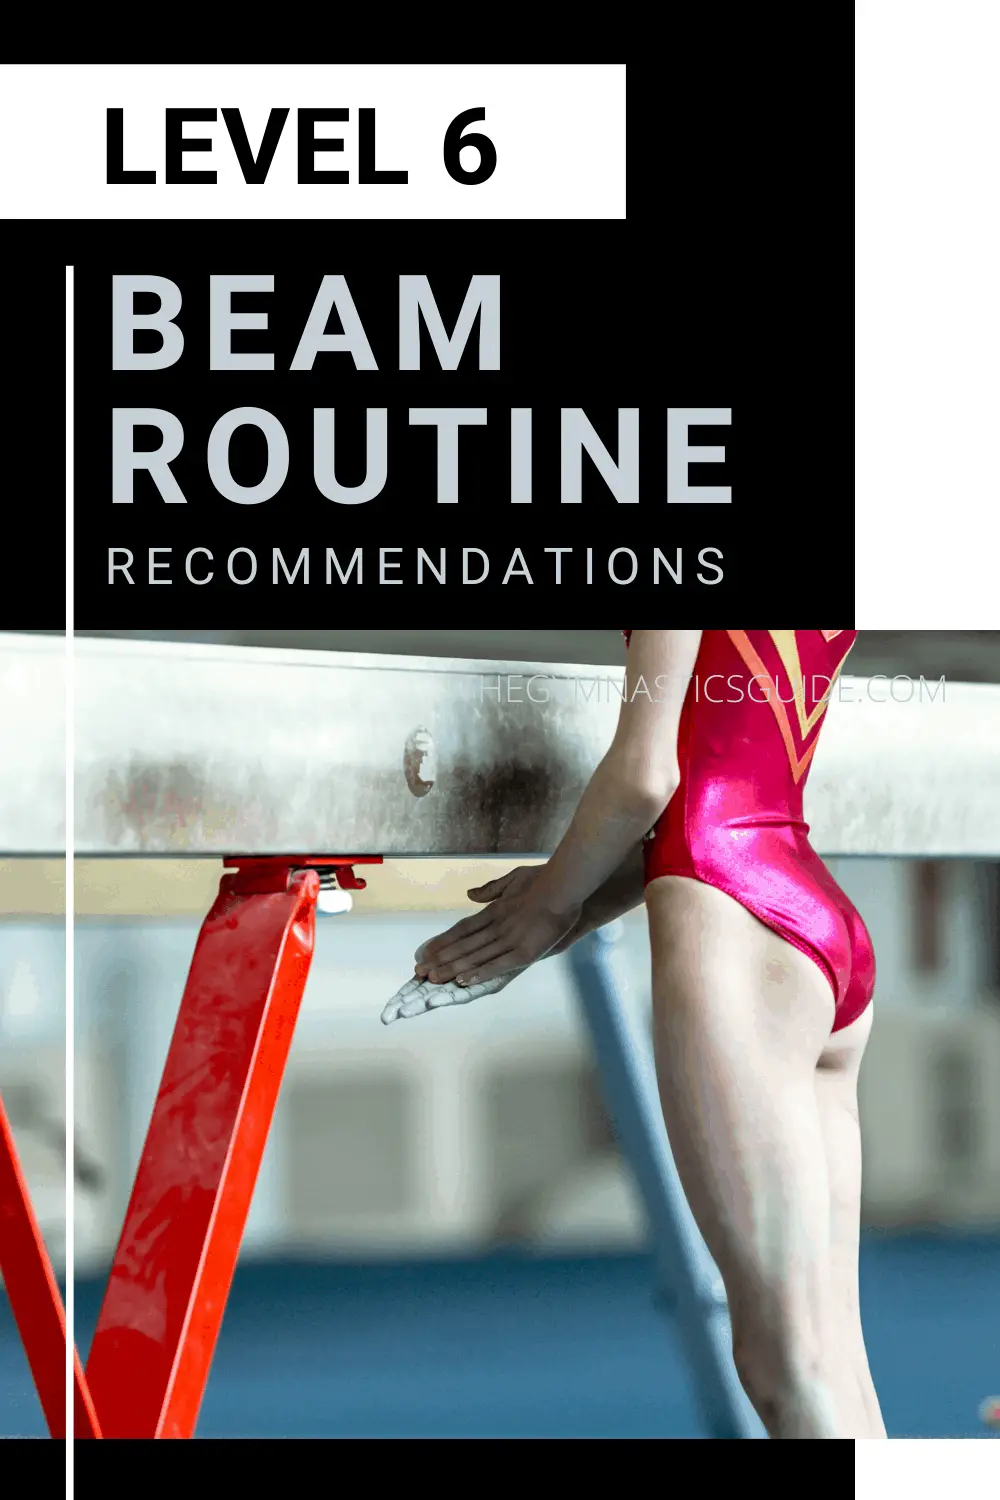 Level 6 Beam Routine Recommendations